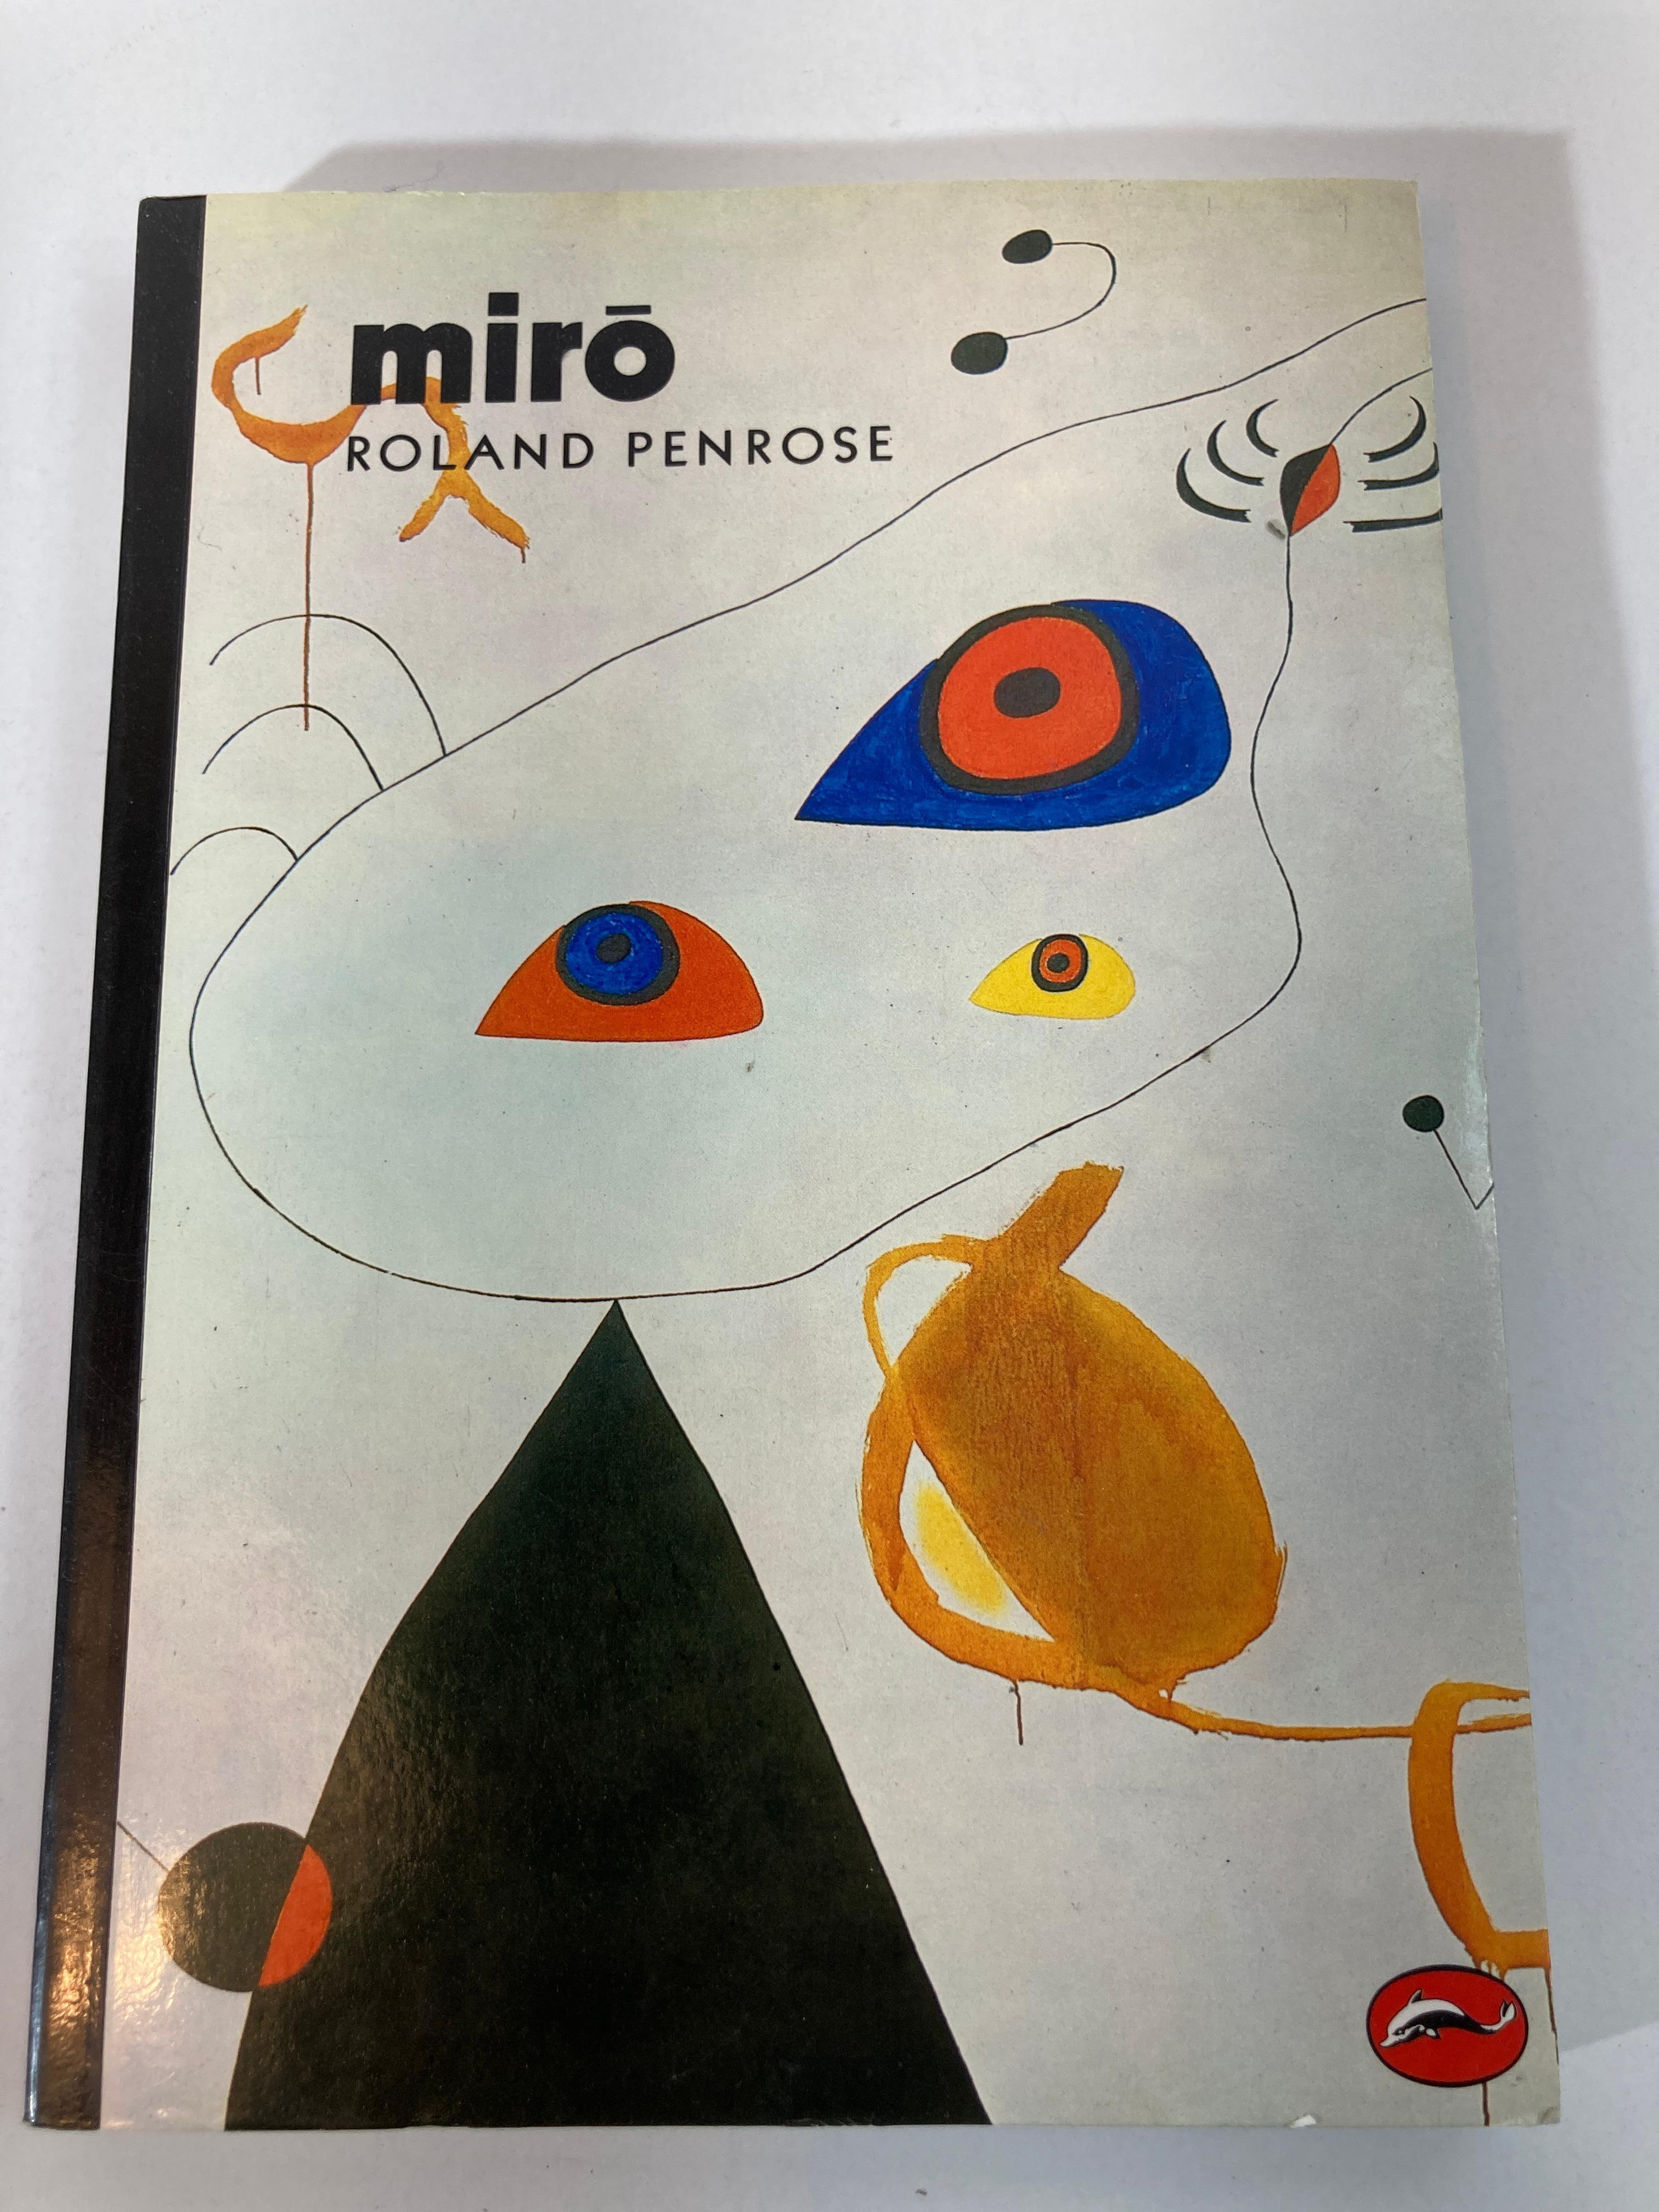 Miro World of Art Paperback by Roland Penrose November 1, 1985.
Publisher ? : ? Thames & Hudson November 1, 1985
Among the great twentieth-century masters, the Surrealist painter Joan Miro stands out for the atmosphere of wit and spontaneity which